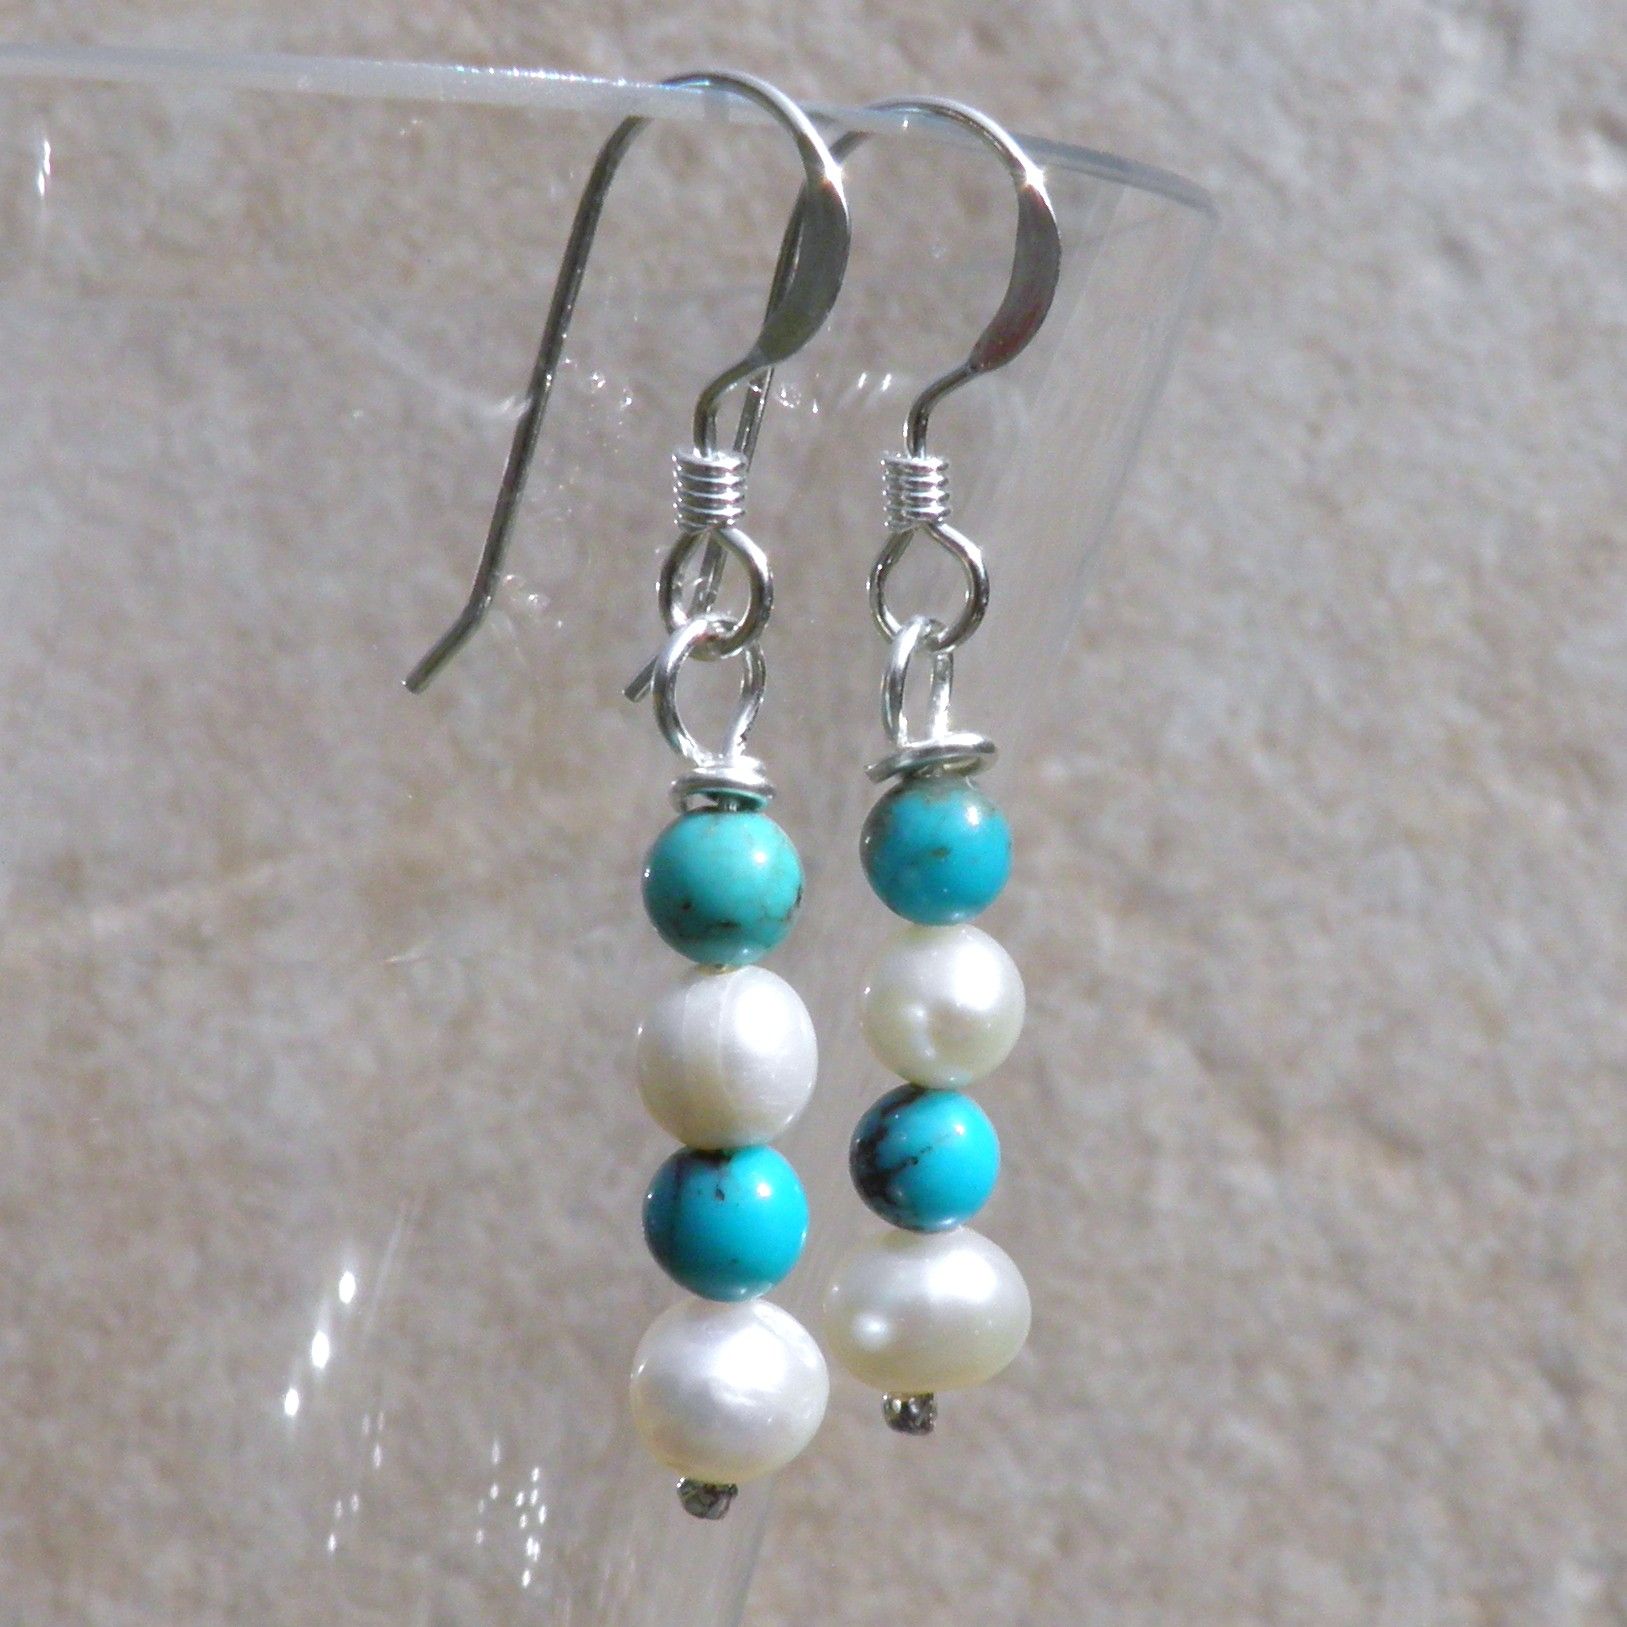 Silver Pearl and Turquoise Earrings - BCE11